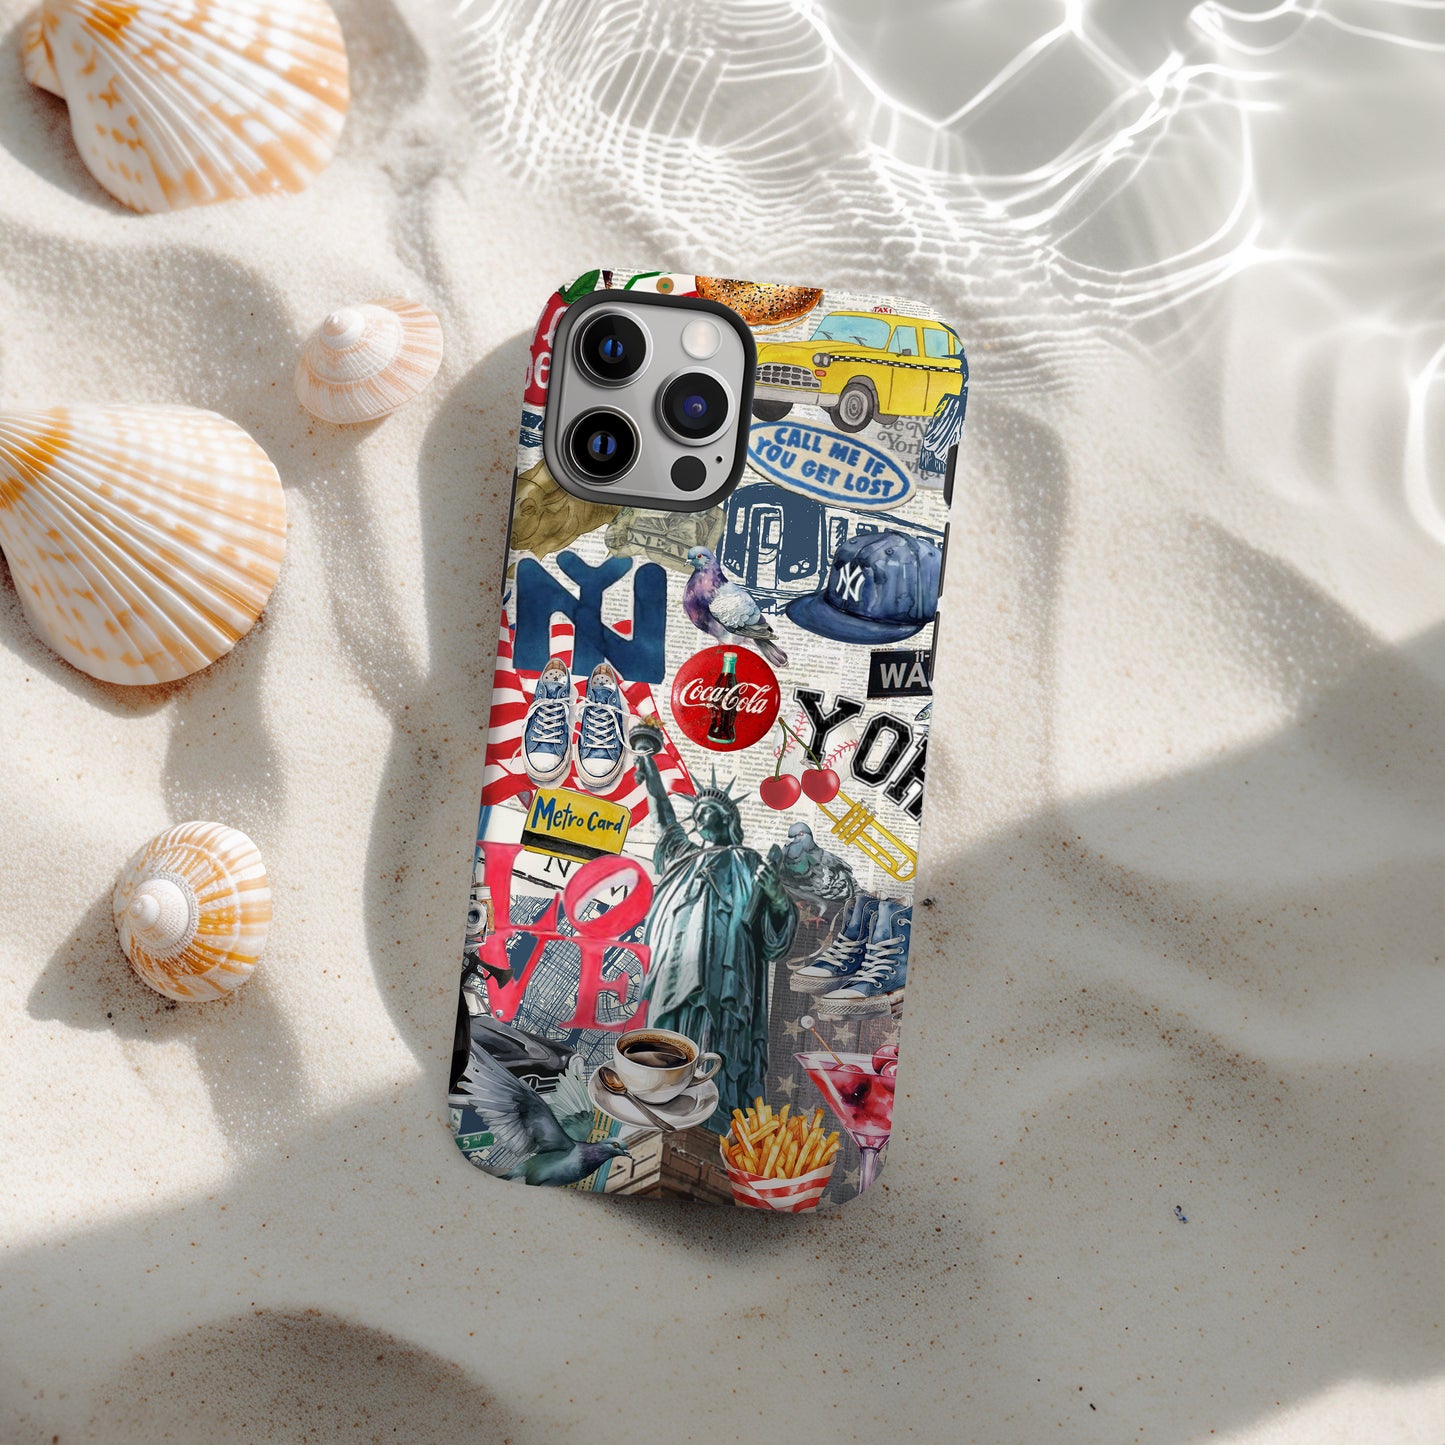 beach view of NY City Collage Phone Case. Scrapbook style collage phone case. New York City phone case for iPhone and Samsung Galaxy by Artscape Market